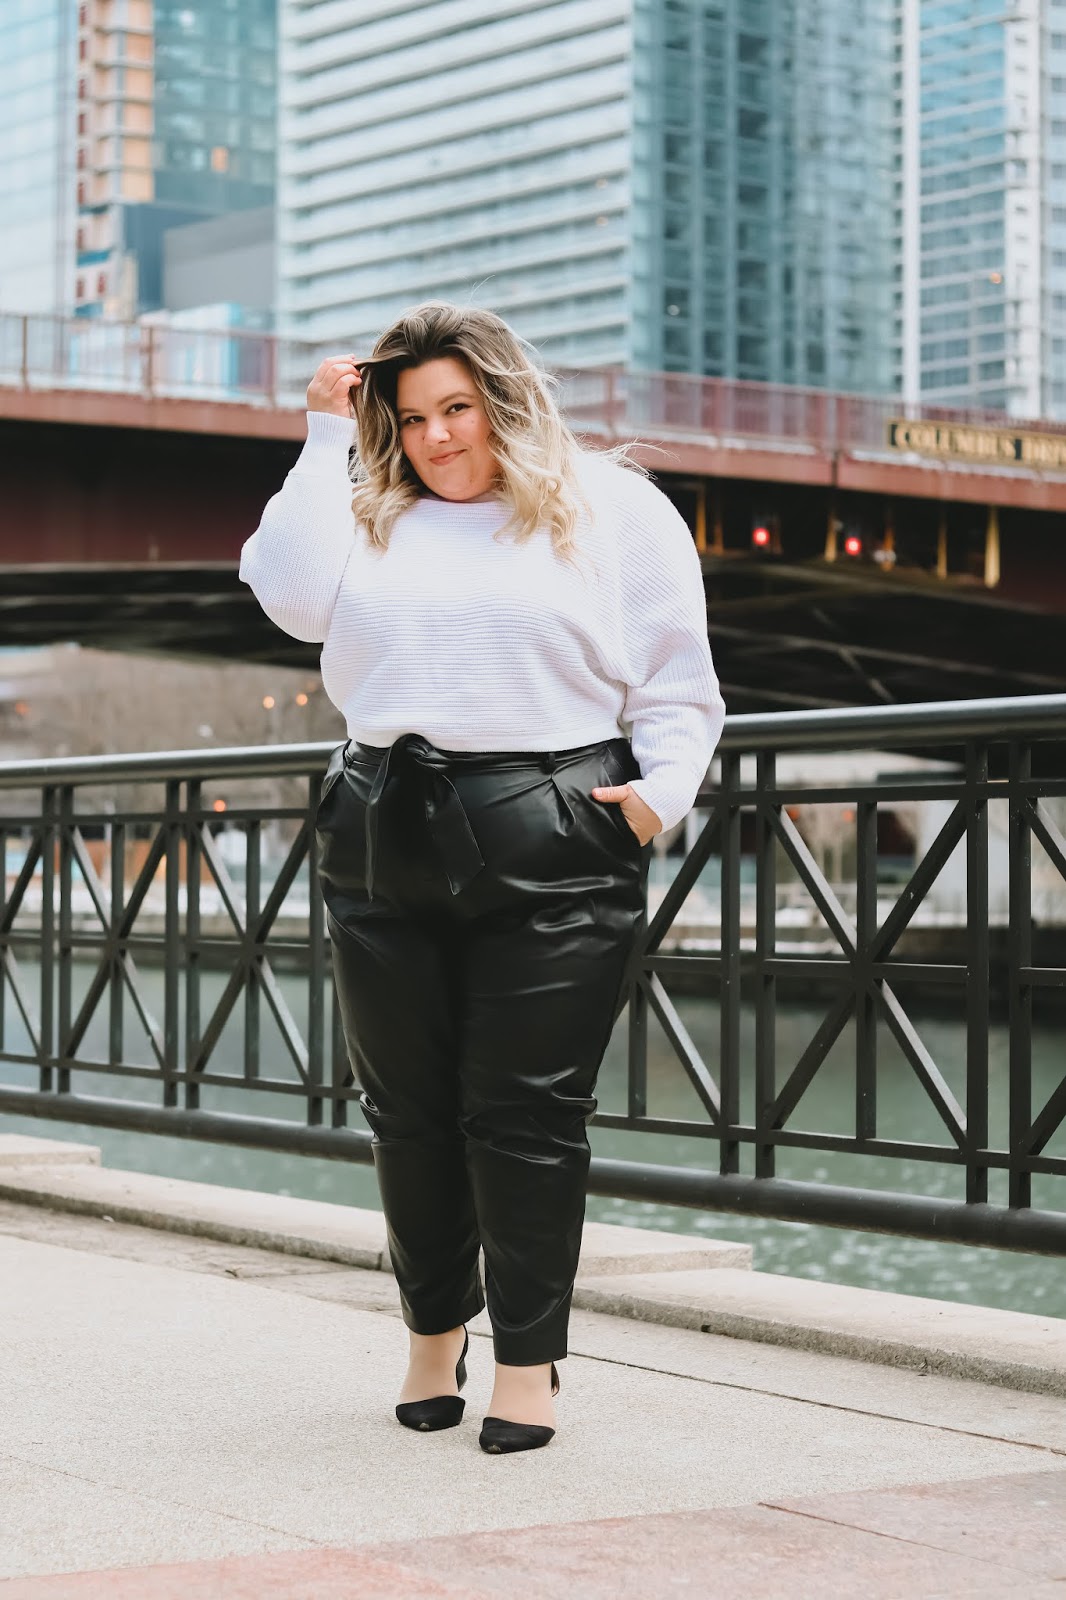 Chicago Plus Size Petite Fashion Blogger, influencer, YouTuber, and model Natalie Craig, of Natalie in the City, reviews Eloquii's Pleat Front Faux Leather Ankle Pants and White Cropped Sweater.